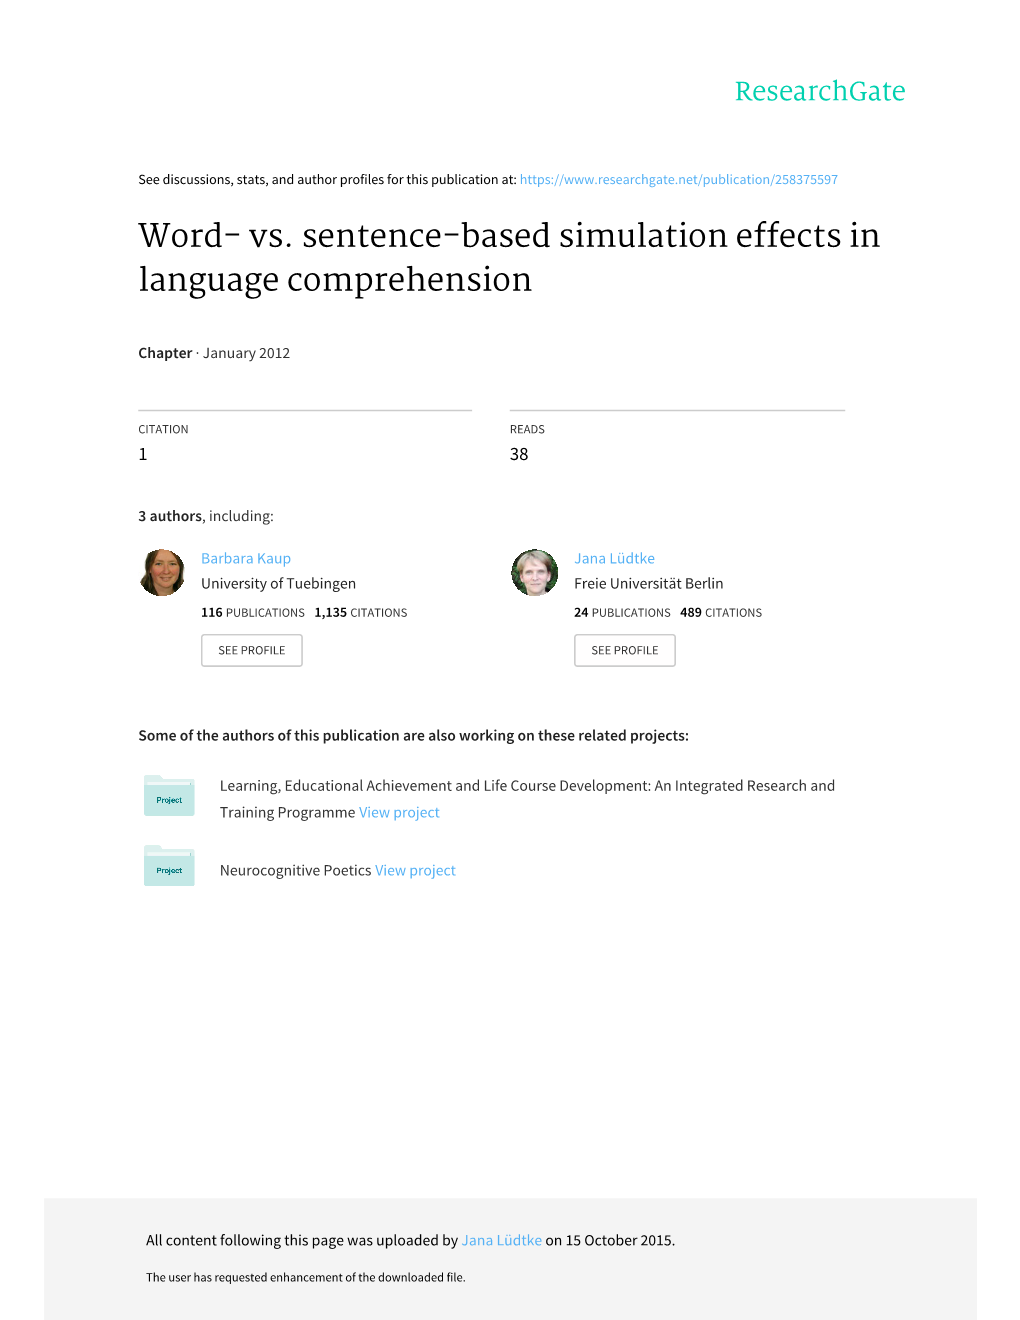 Word- Vs. Sentence-Based Simulation Effects in Language Comprehension